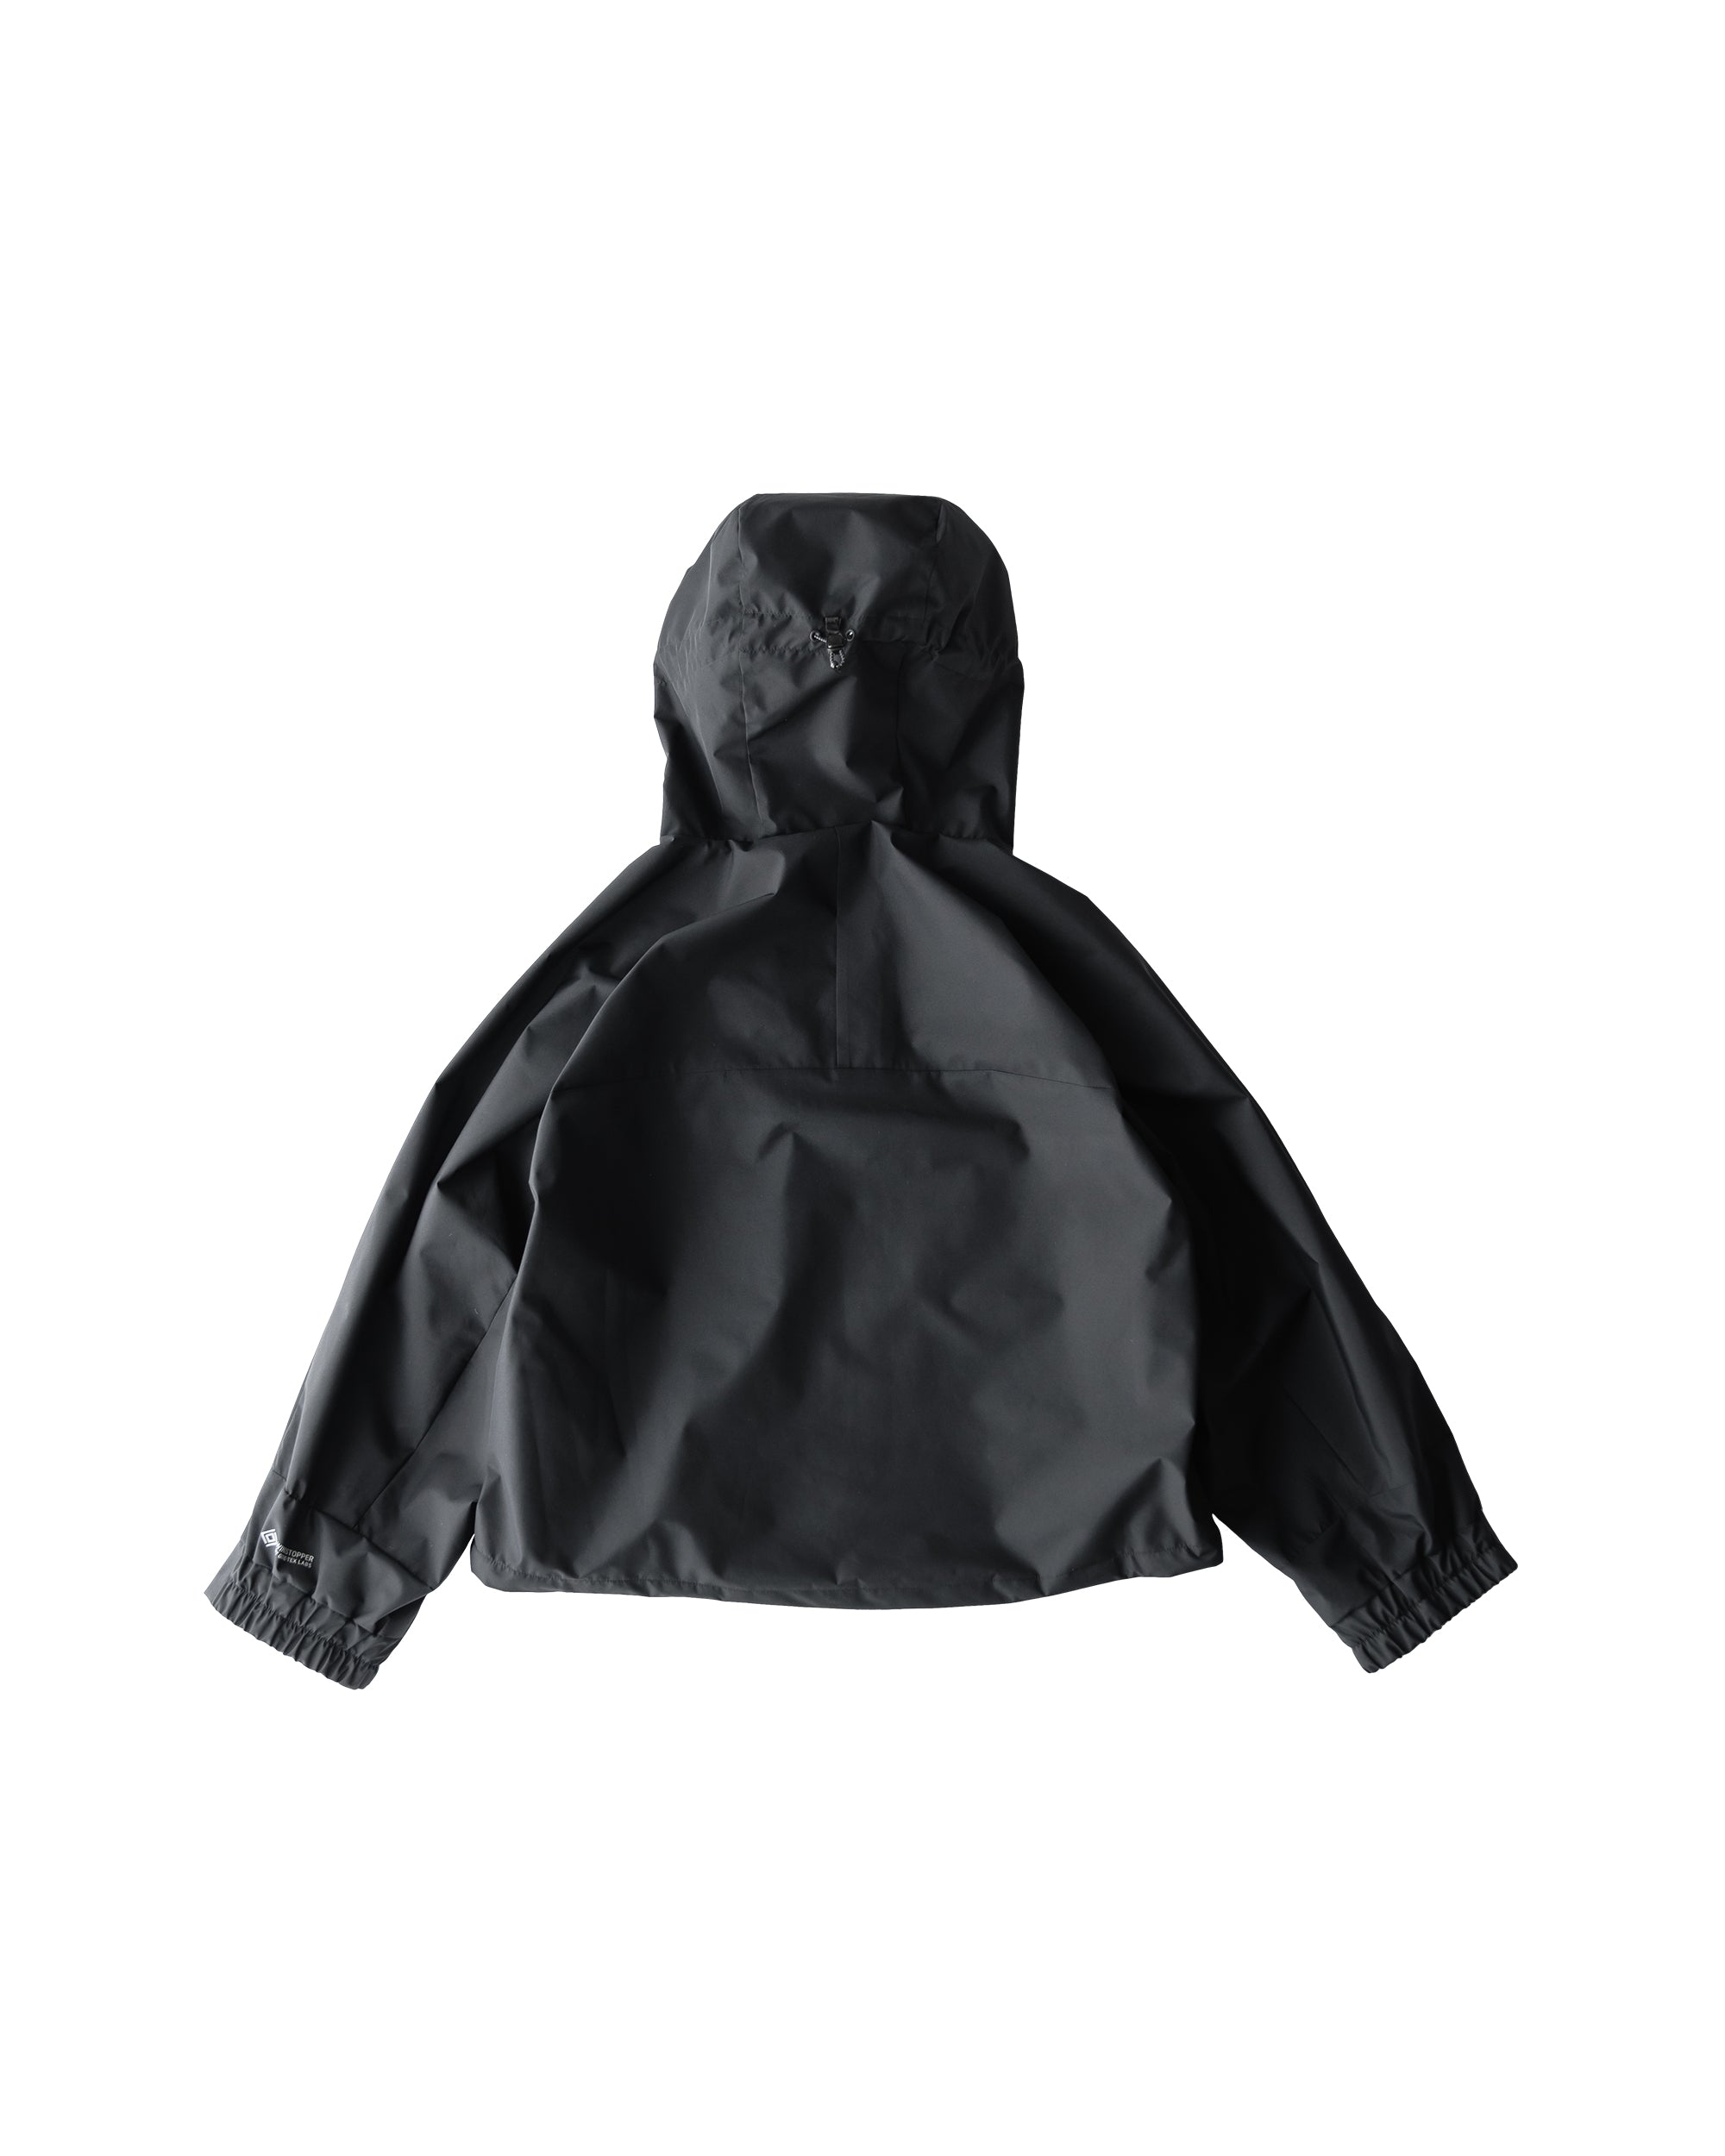 5.29 WED 20:00- IN STOCK】+phenix WINDSTOPPER® by GORE-TEX LABS CITY W